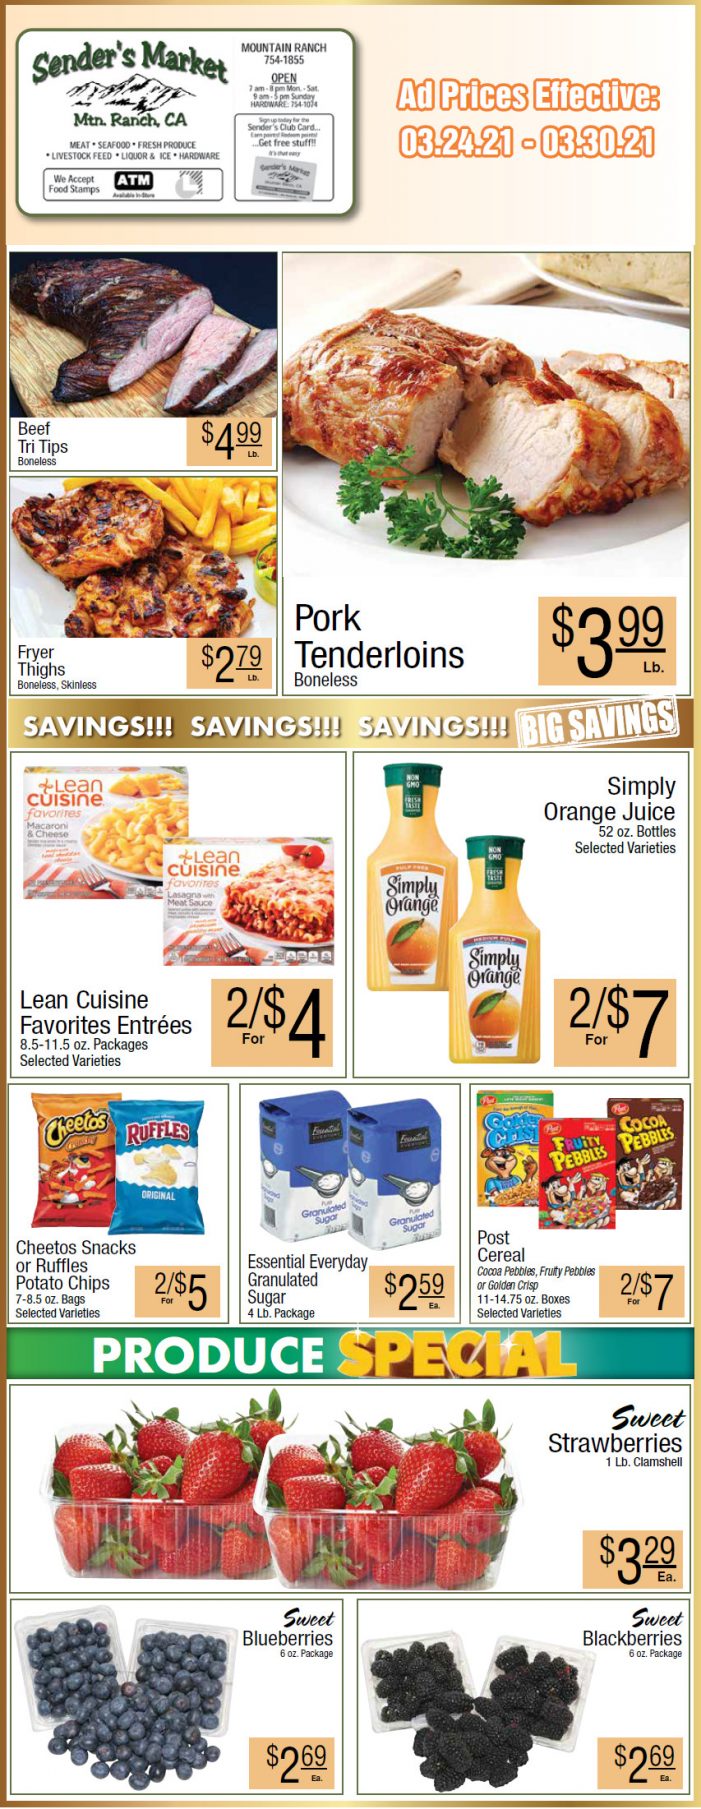 Sender’s Market’s Weekly Ad & Grocery Specials Through March 30th.  Shop Local & Save!